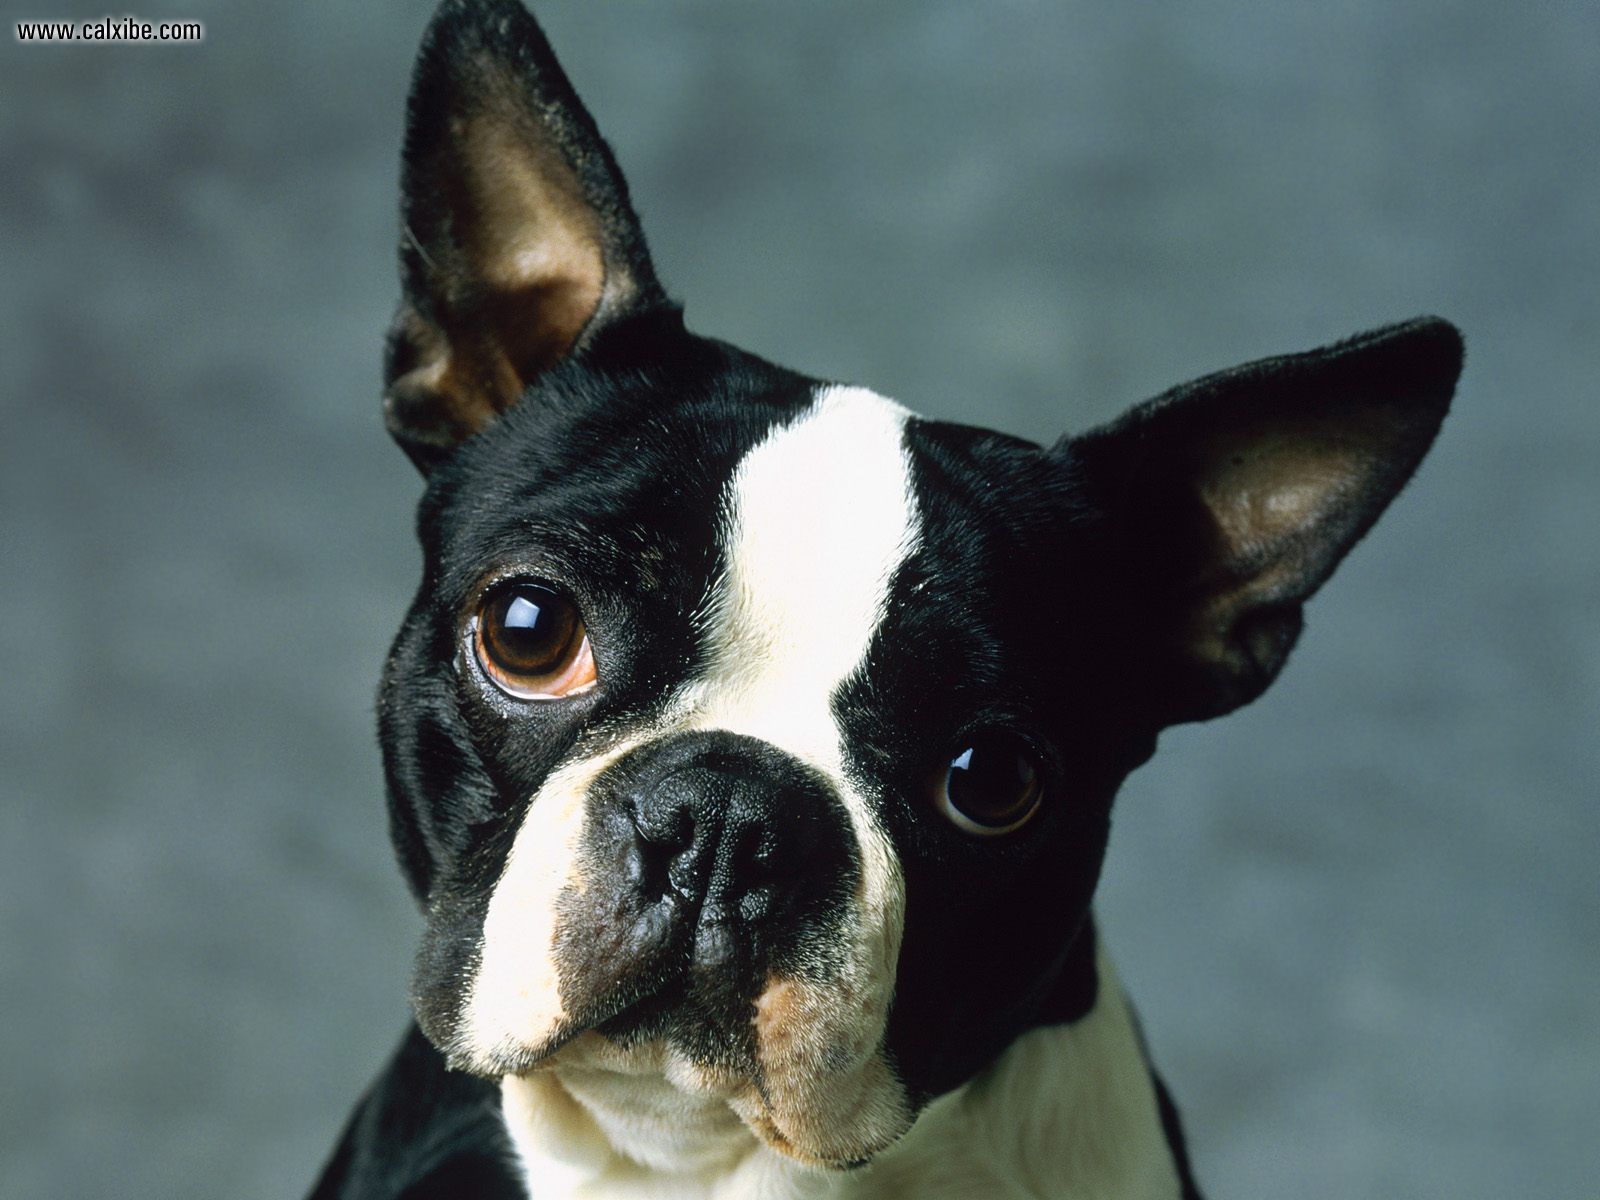 Animals Boston Terrier, picture nr. 14229